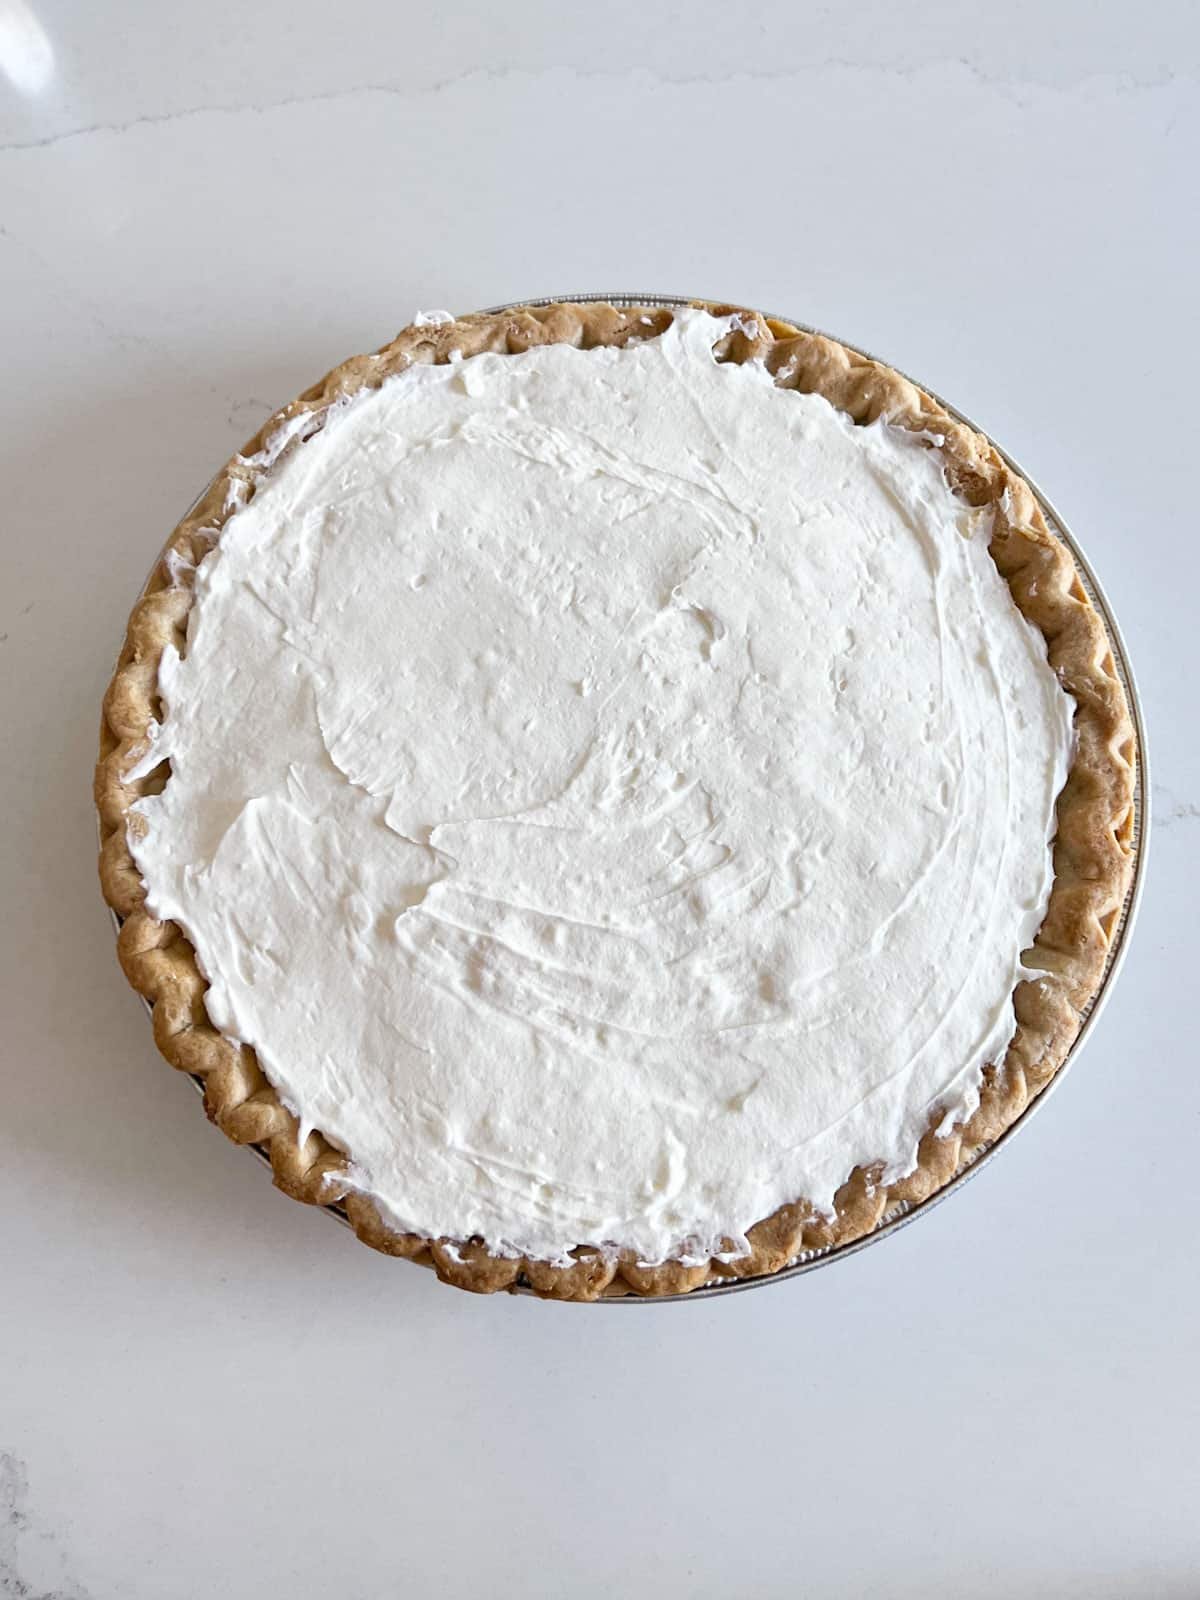 Cream cheese mixture spread in the baked pie shell.